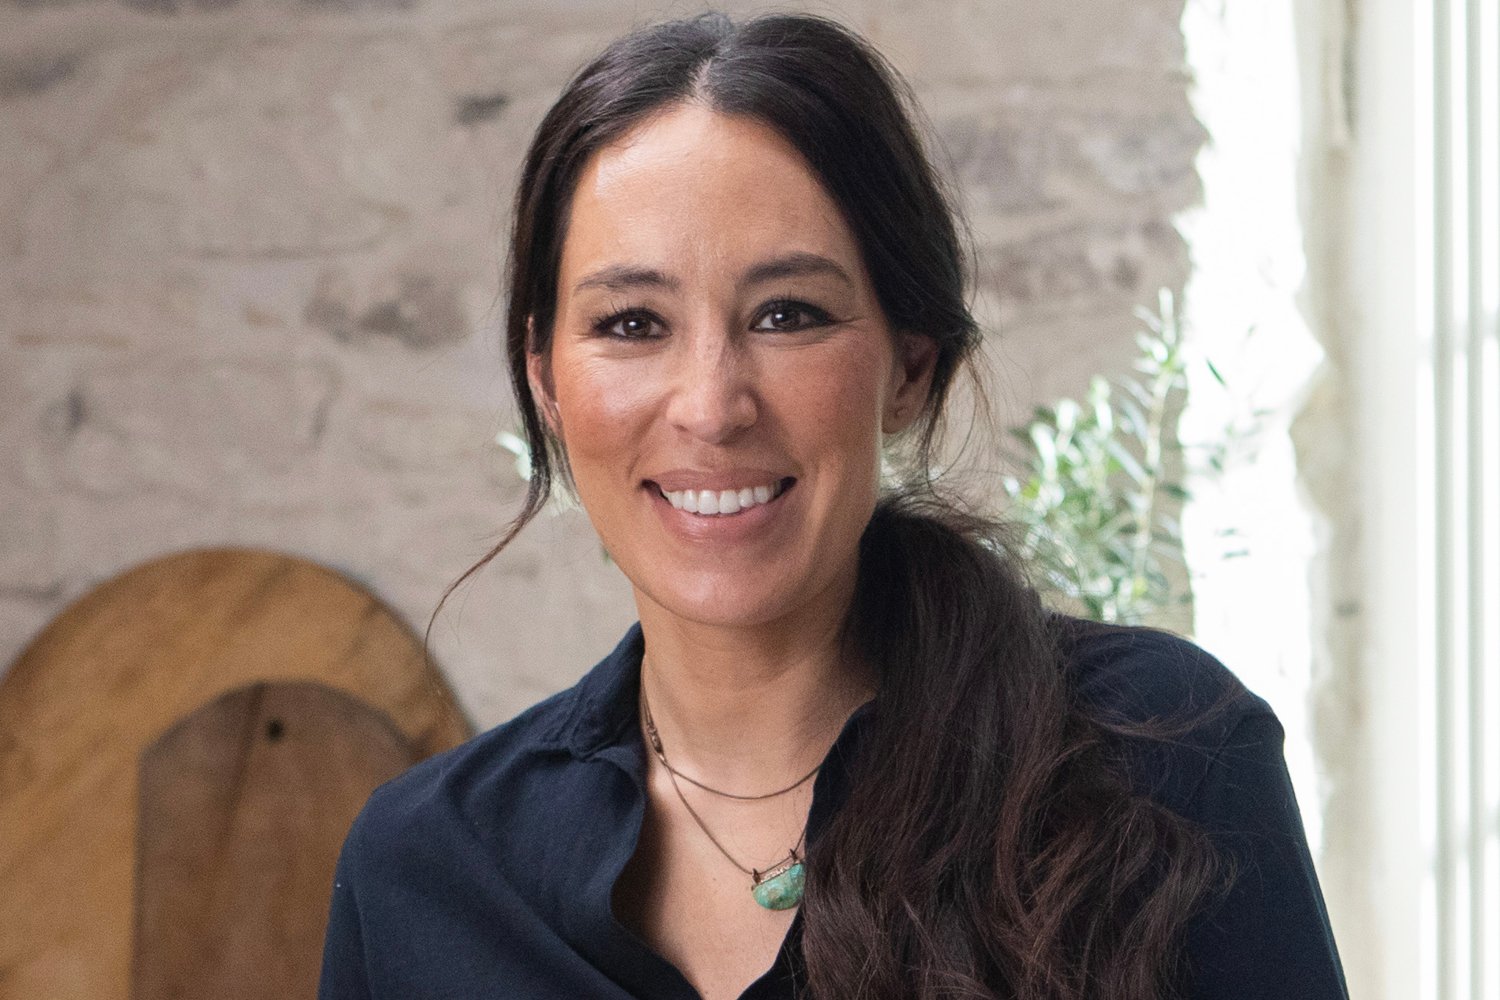 Joanna Gaines smiling on the set of 'Magnolia Table'